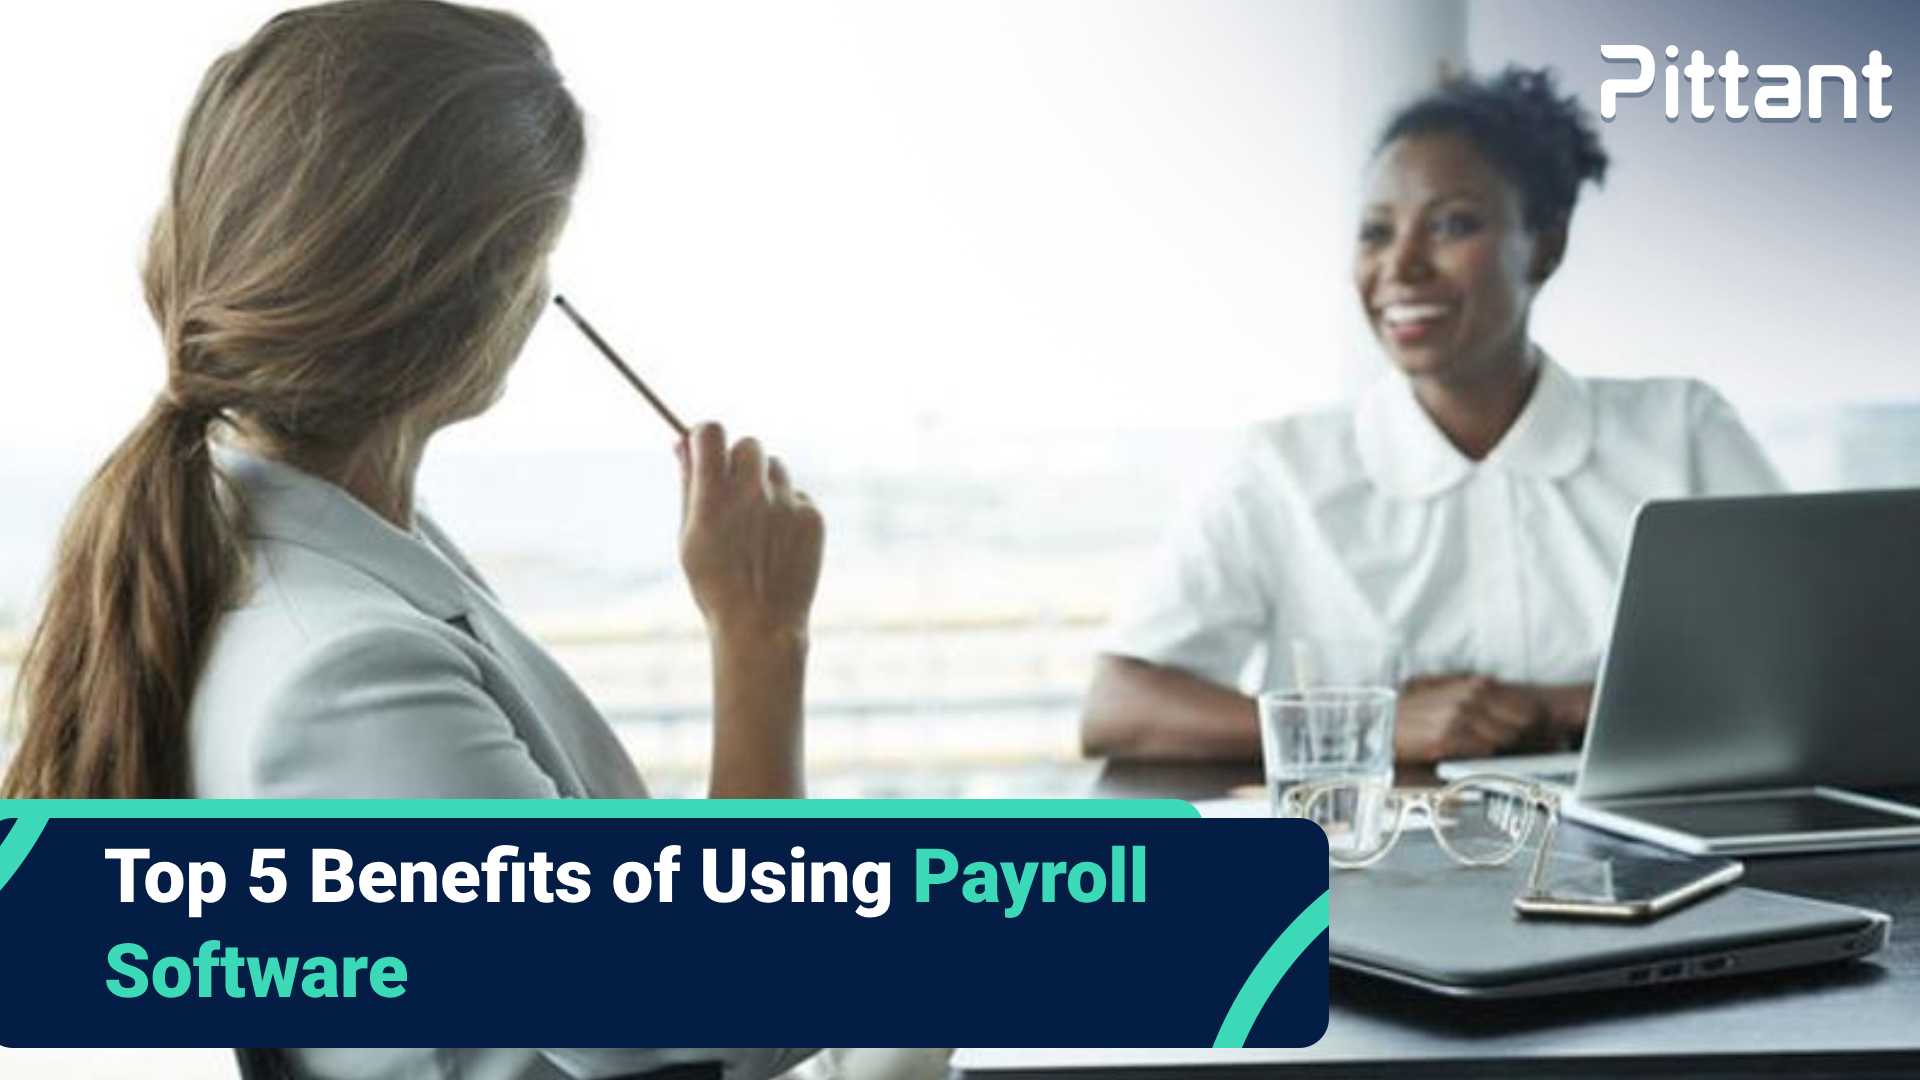 Advantages of Payroll Software